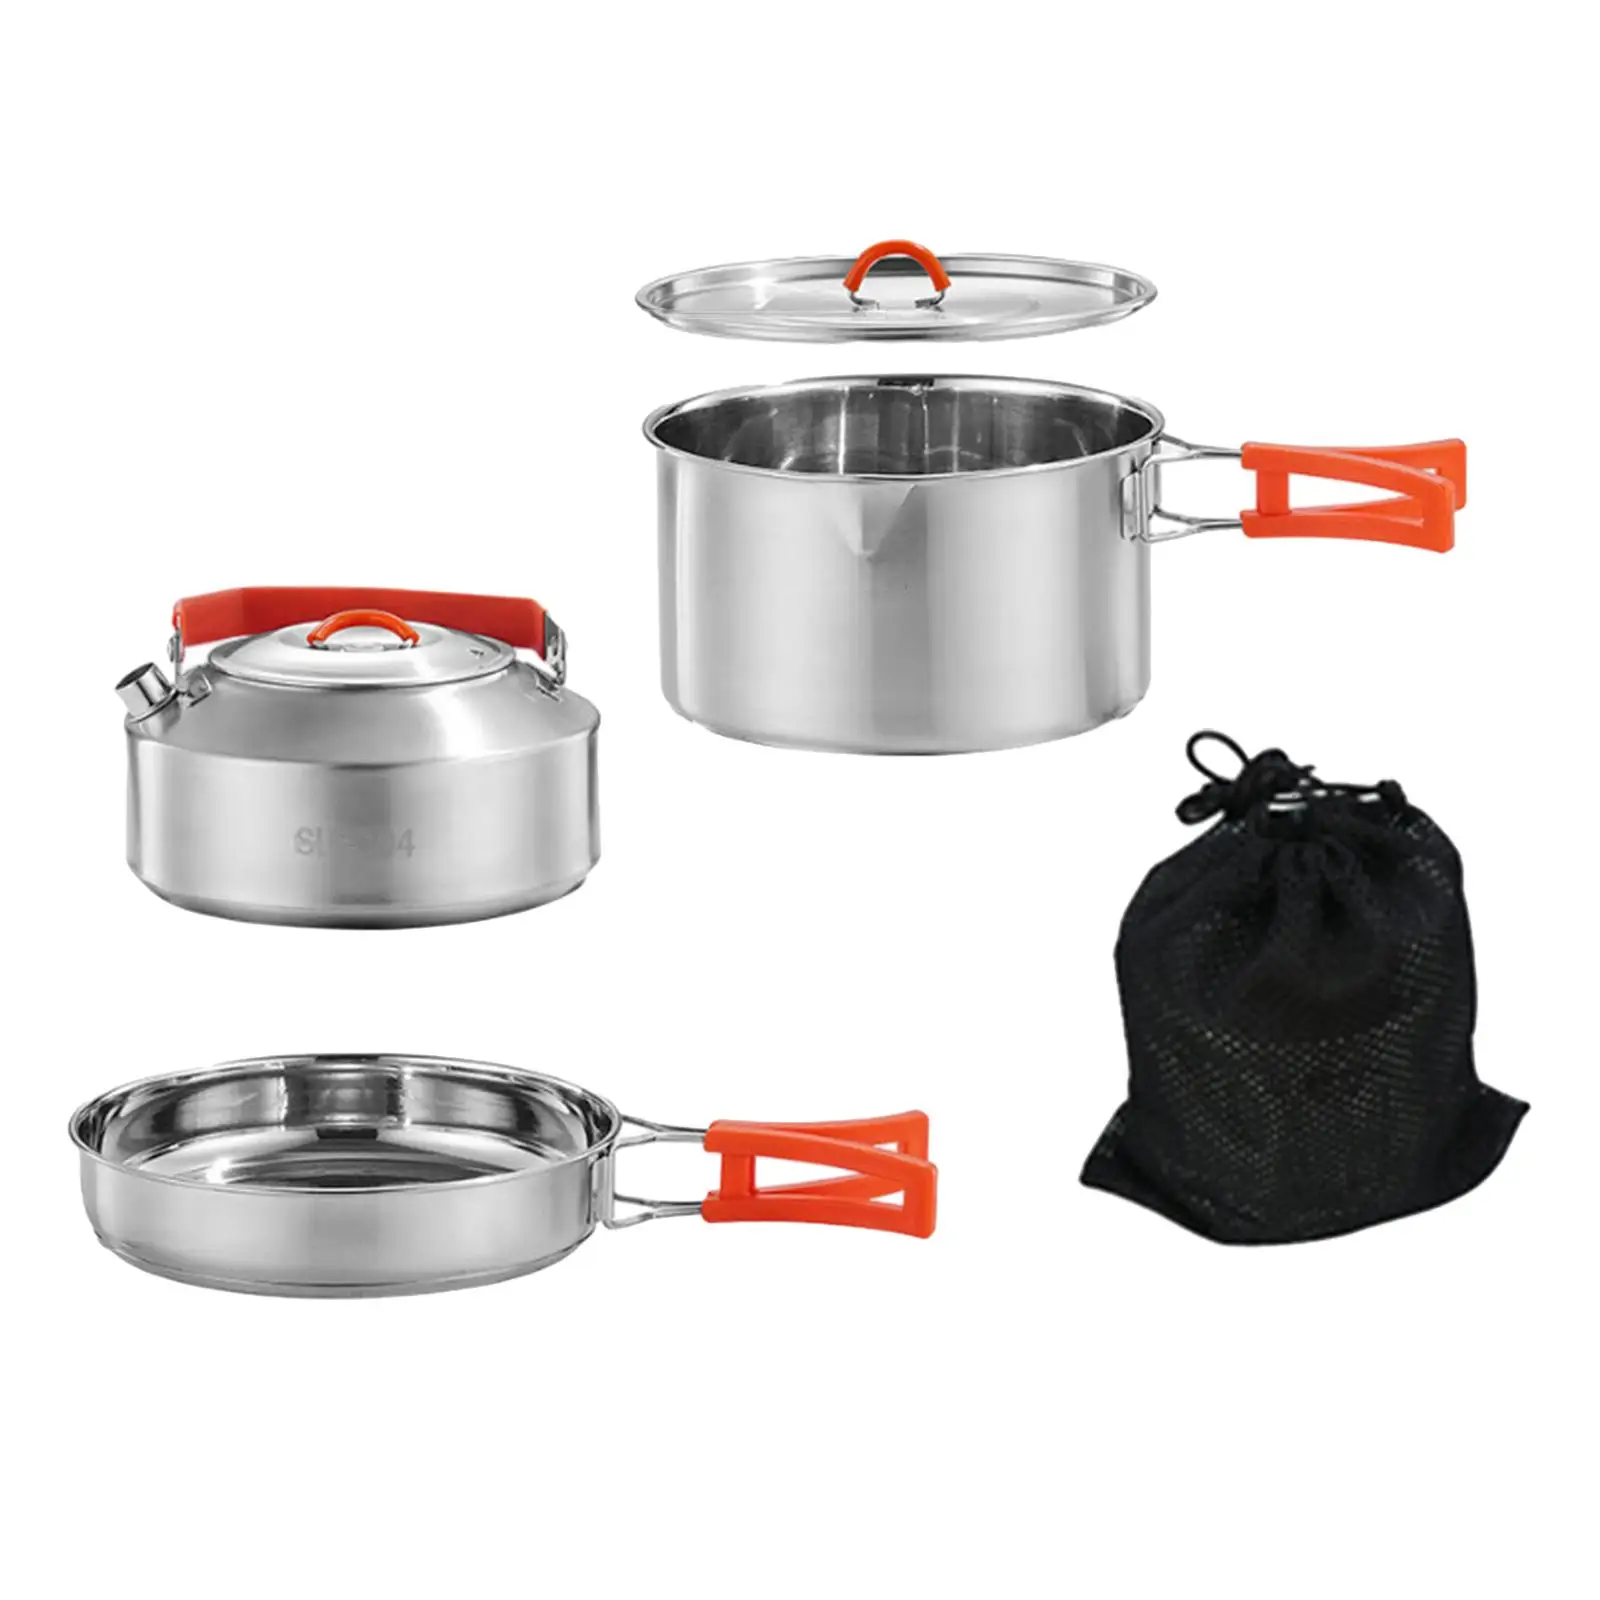 Camping Cookware Set Included Mesh Carry Bag Stainless Steel Camping Cooking Set